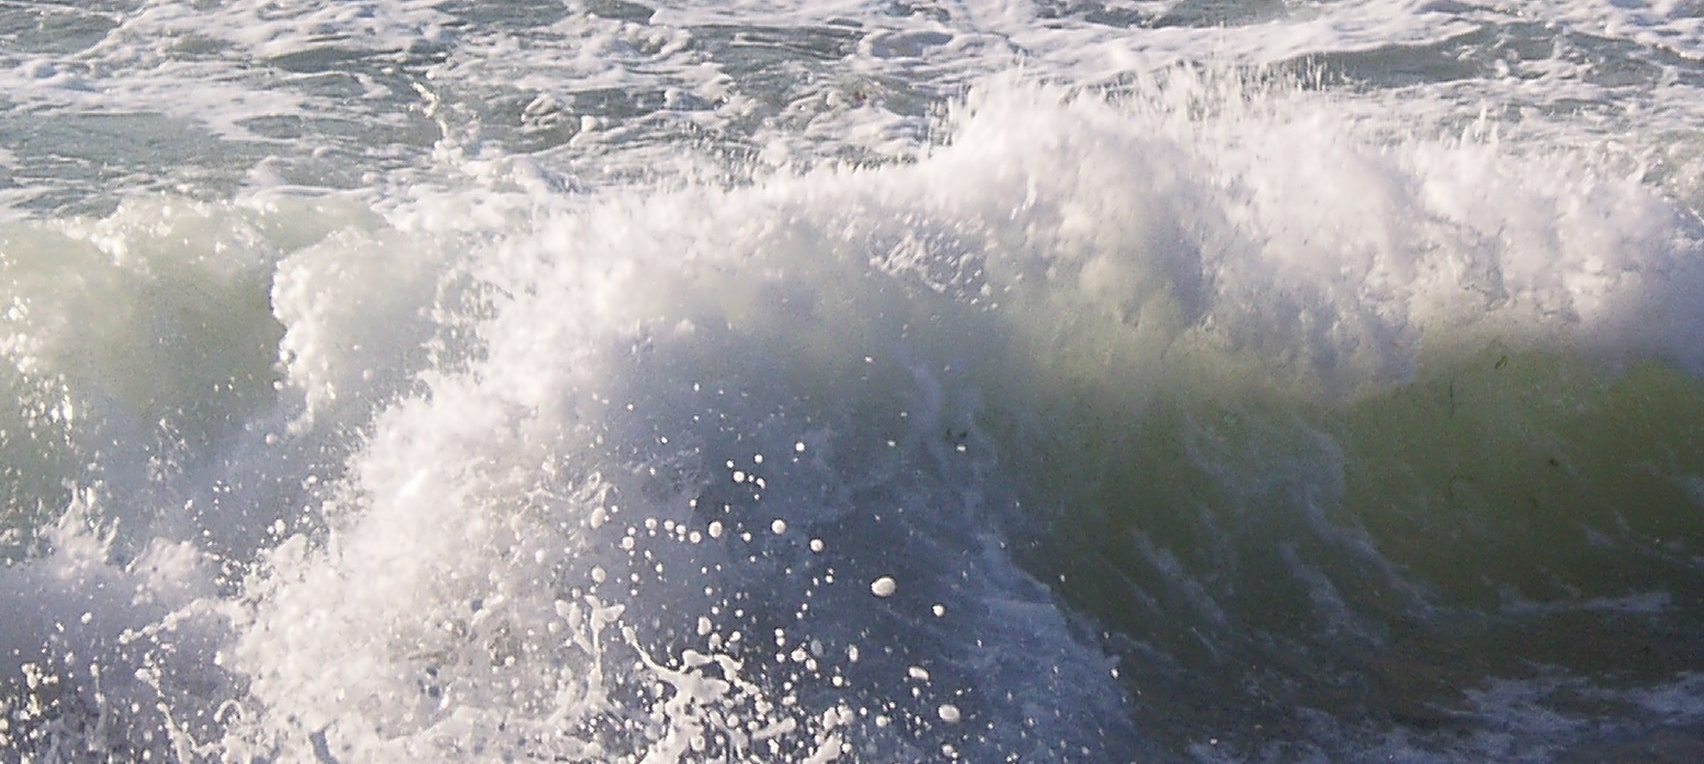 Public domain image. Original available at http://commons.wikimedia.org/wiki/File:Cornwall_Wave.jpg#mediaviewer/File:Cornwall_Wave.jpg